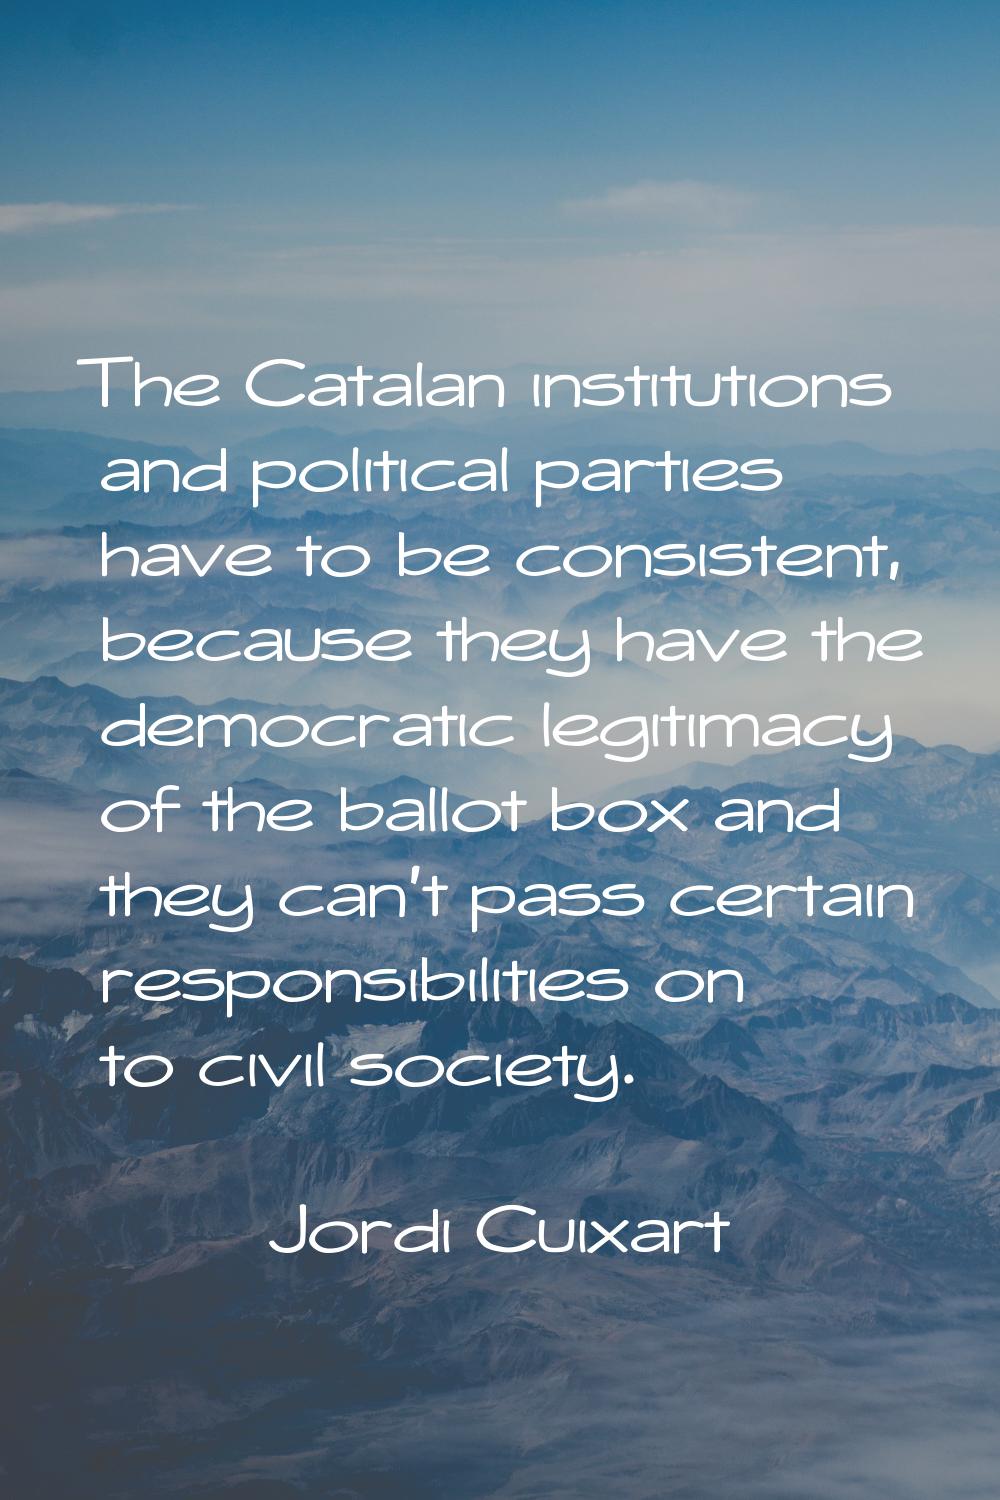 The Catalan institutions and political parties have to be consistent, because they have the democra